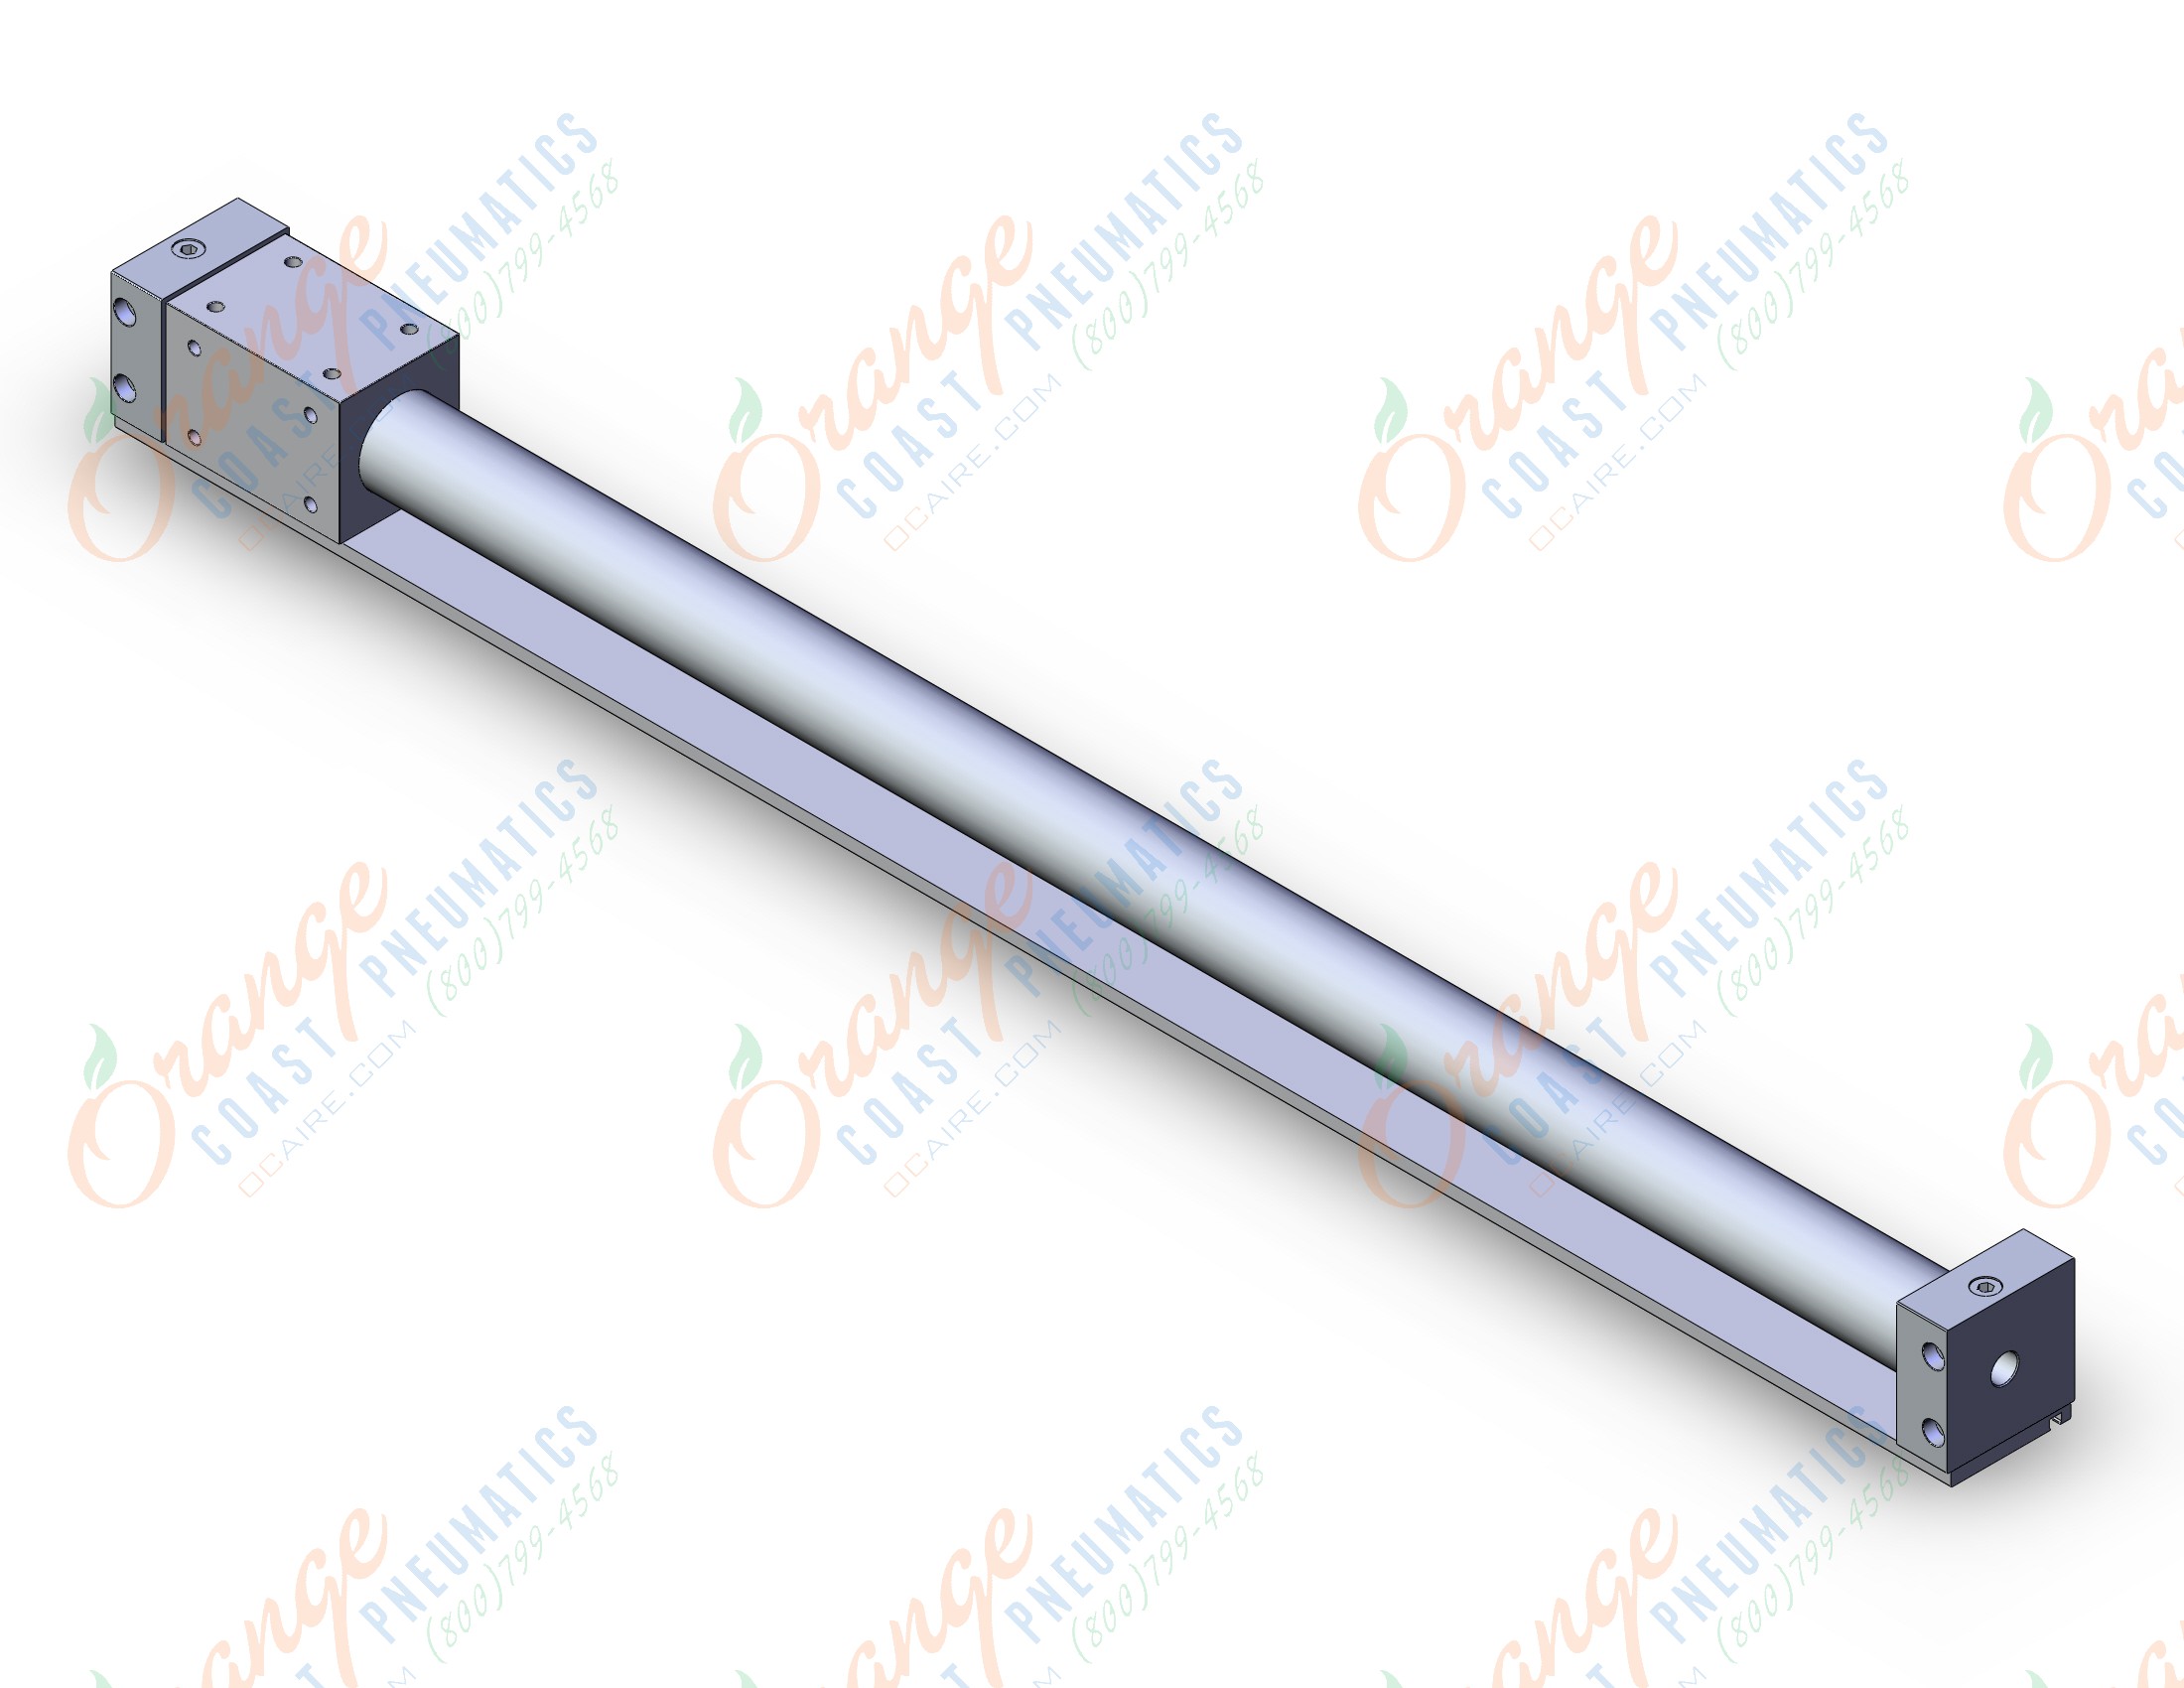 SMC CY3R40TN-800-M9BL cy3, magnet coupled rodless cylinder, RODLESS CYLINDER